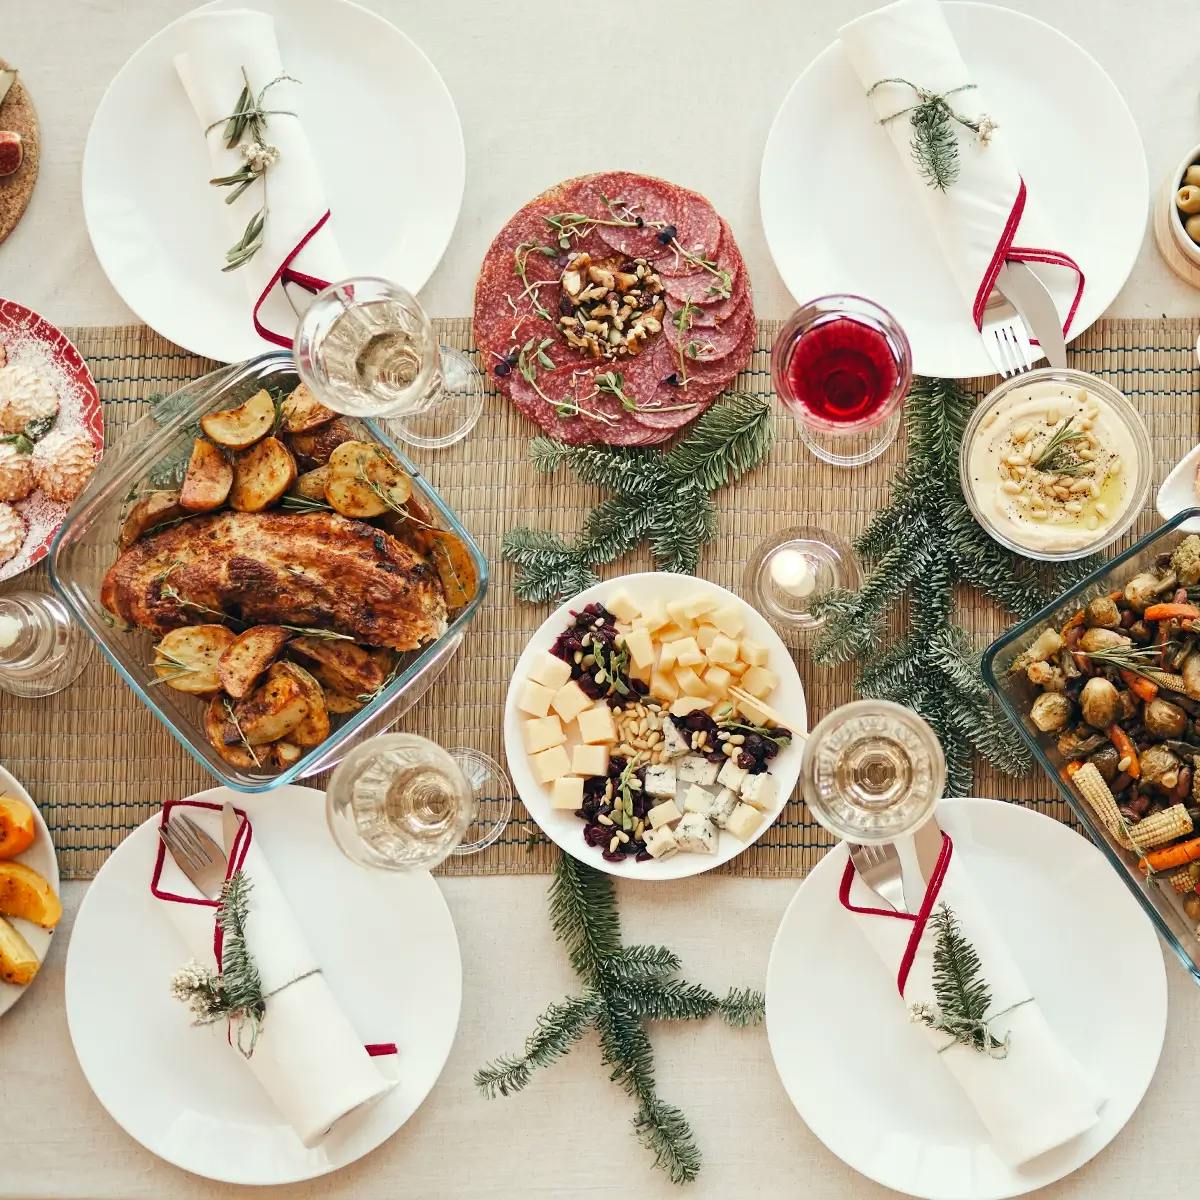 Top view of a wide variety of delicious homemade food on a beautiful Christmas dining table decorated with fir branches.